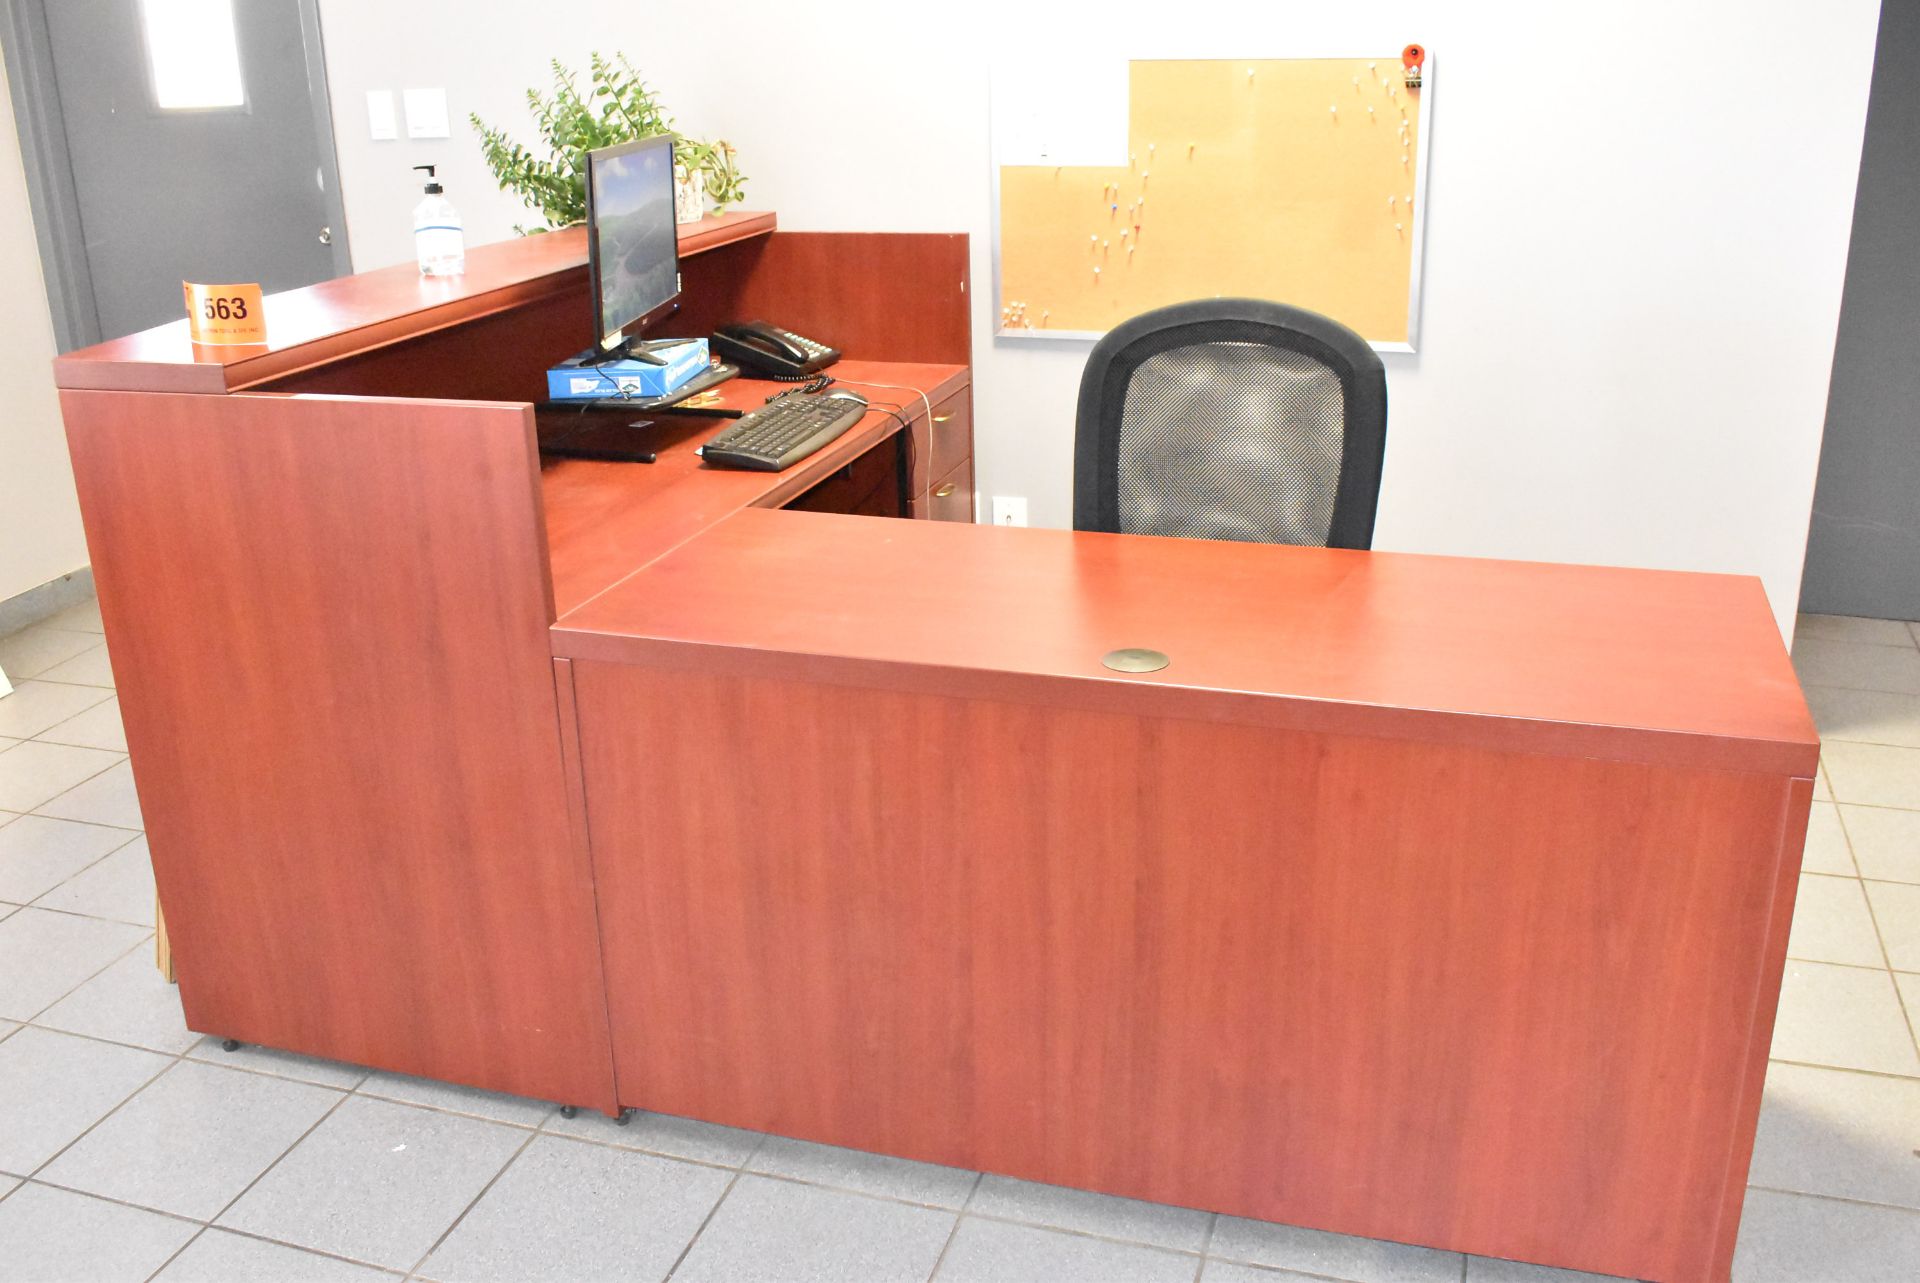 LOT/ CONTENTS OF WORK STATION CONSISTING OF L-SHAPED OFFICE DESK AND CHAIR (FURNITURE ONLY, NO